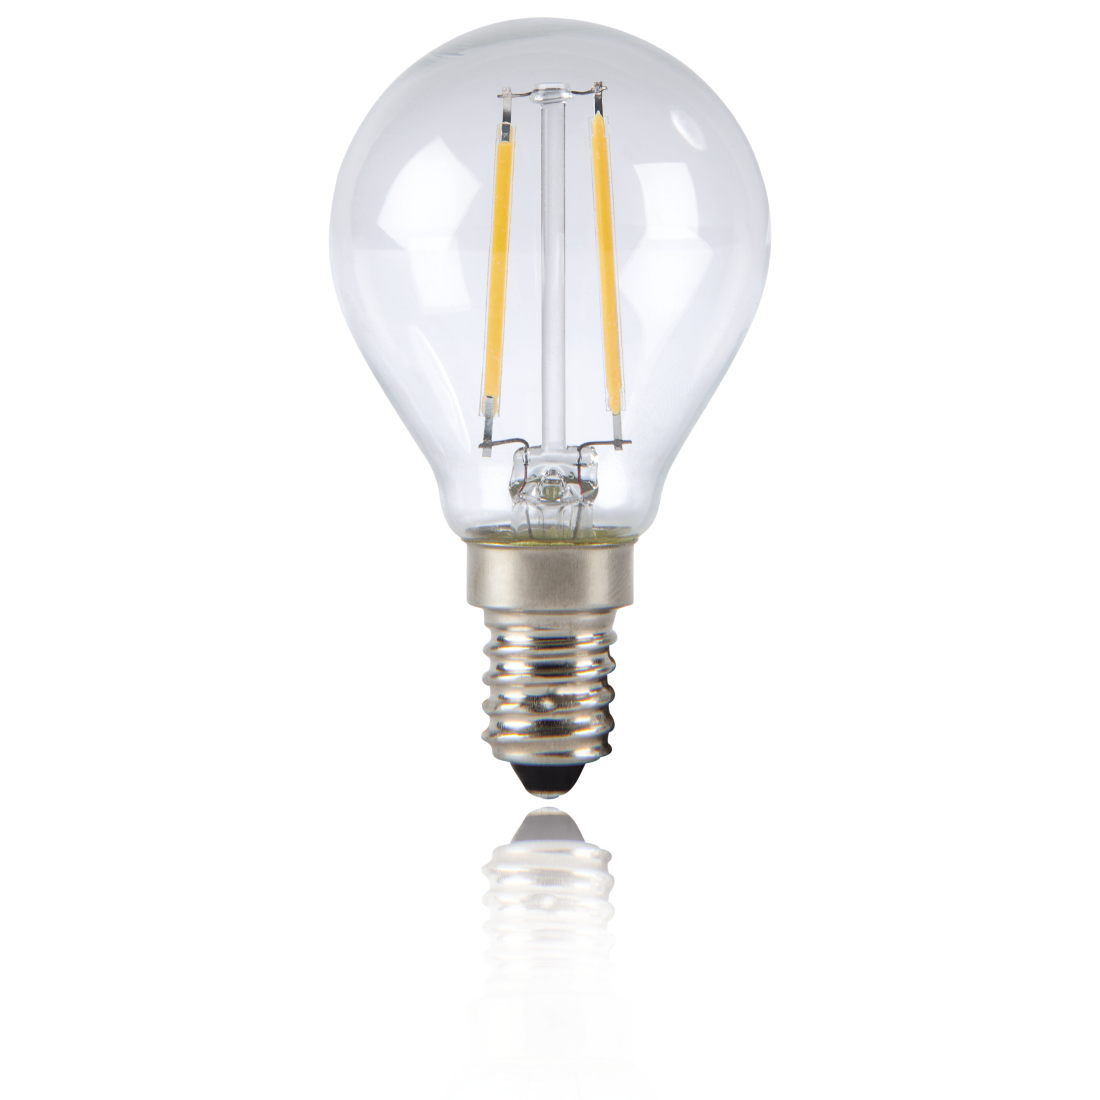 abx2 High-Res Image 2 - Xavax, LED Filament, E14, 250 lm Replaces 25W, Drop Bulb, warm white